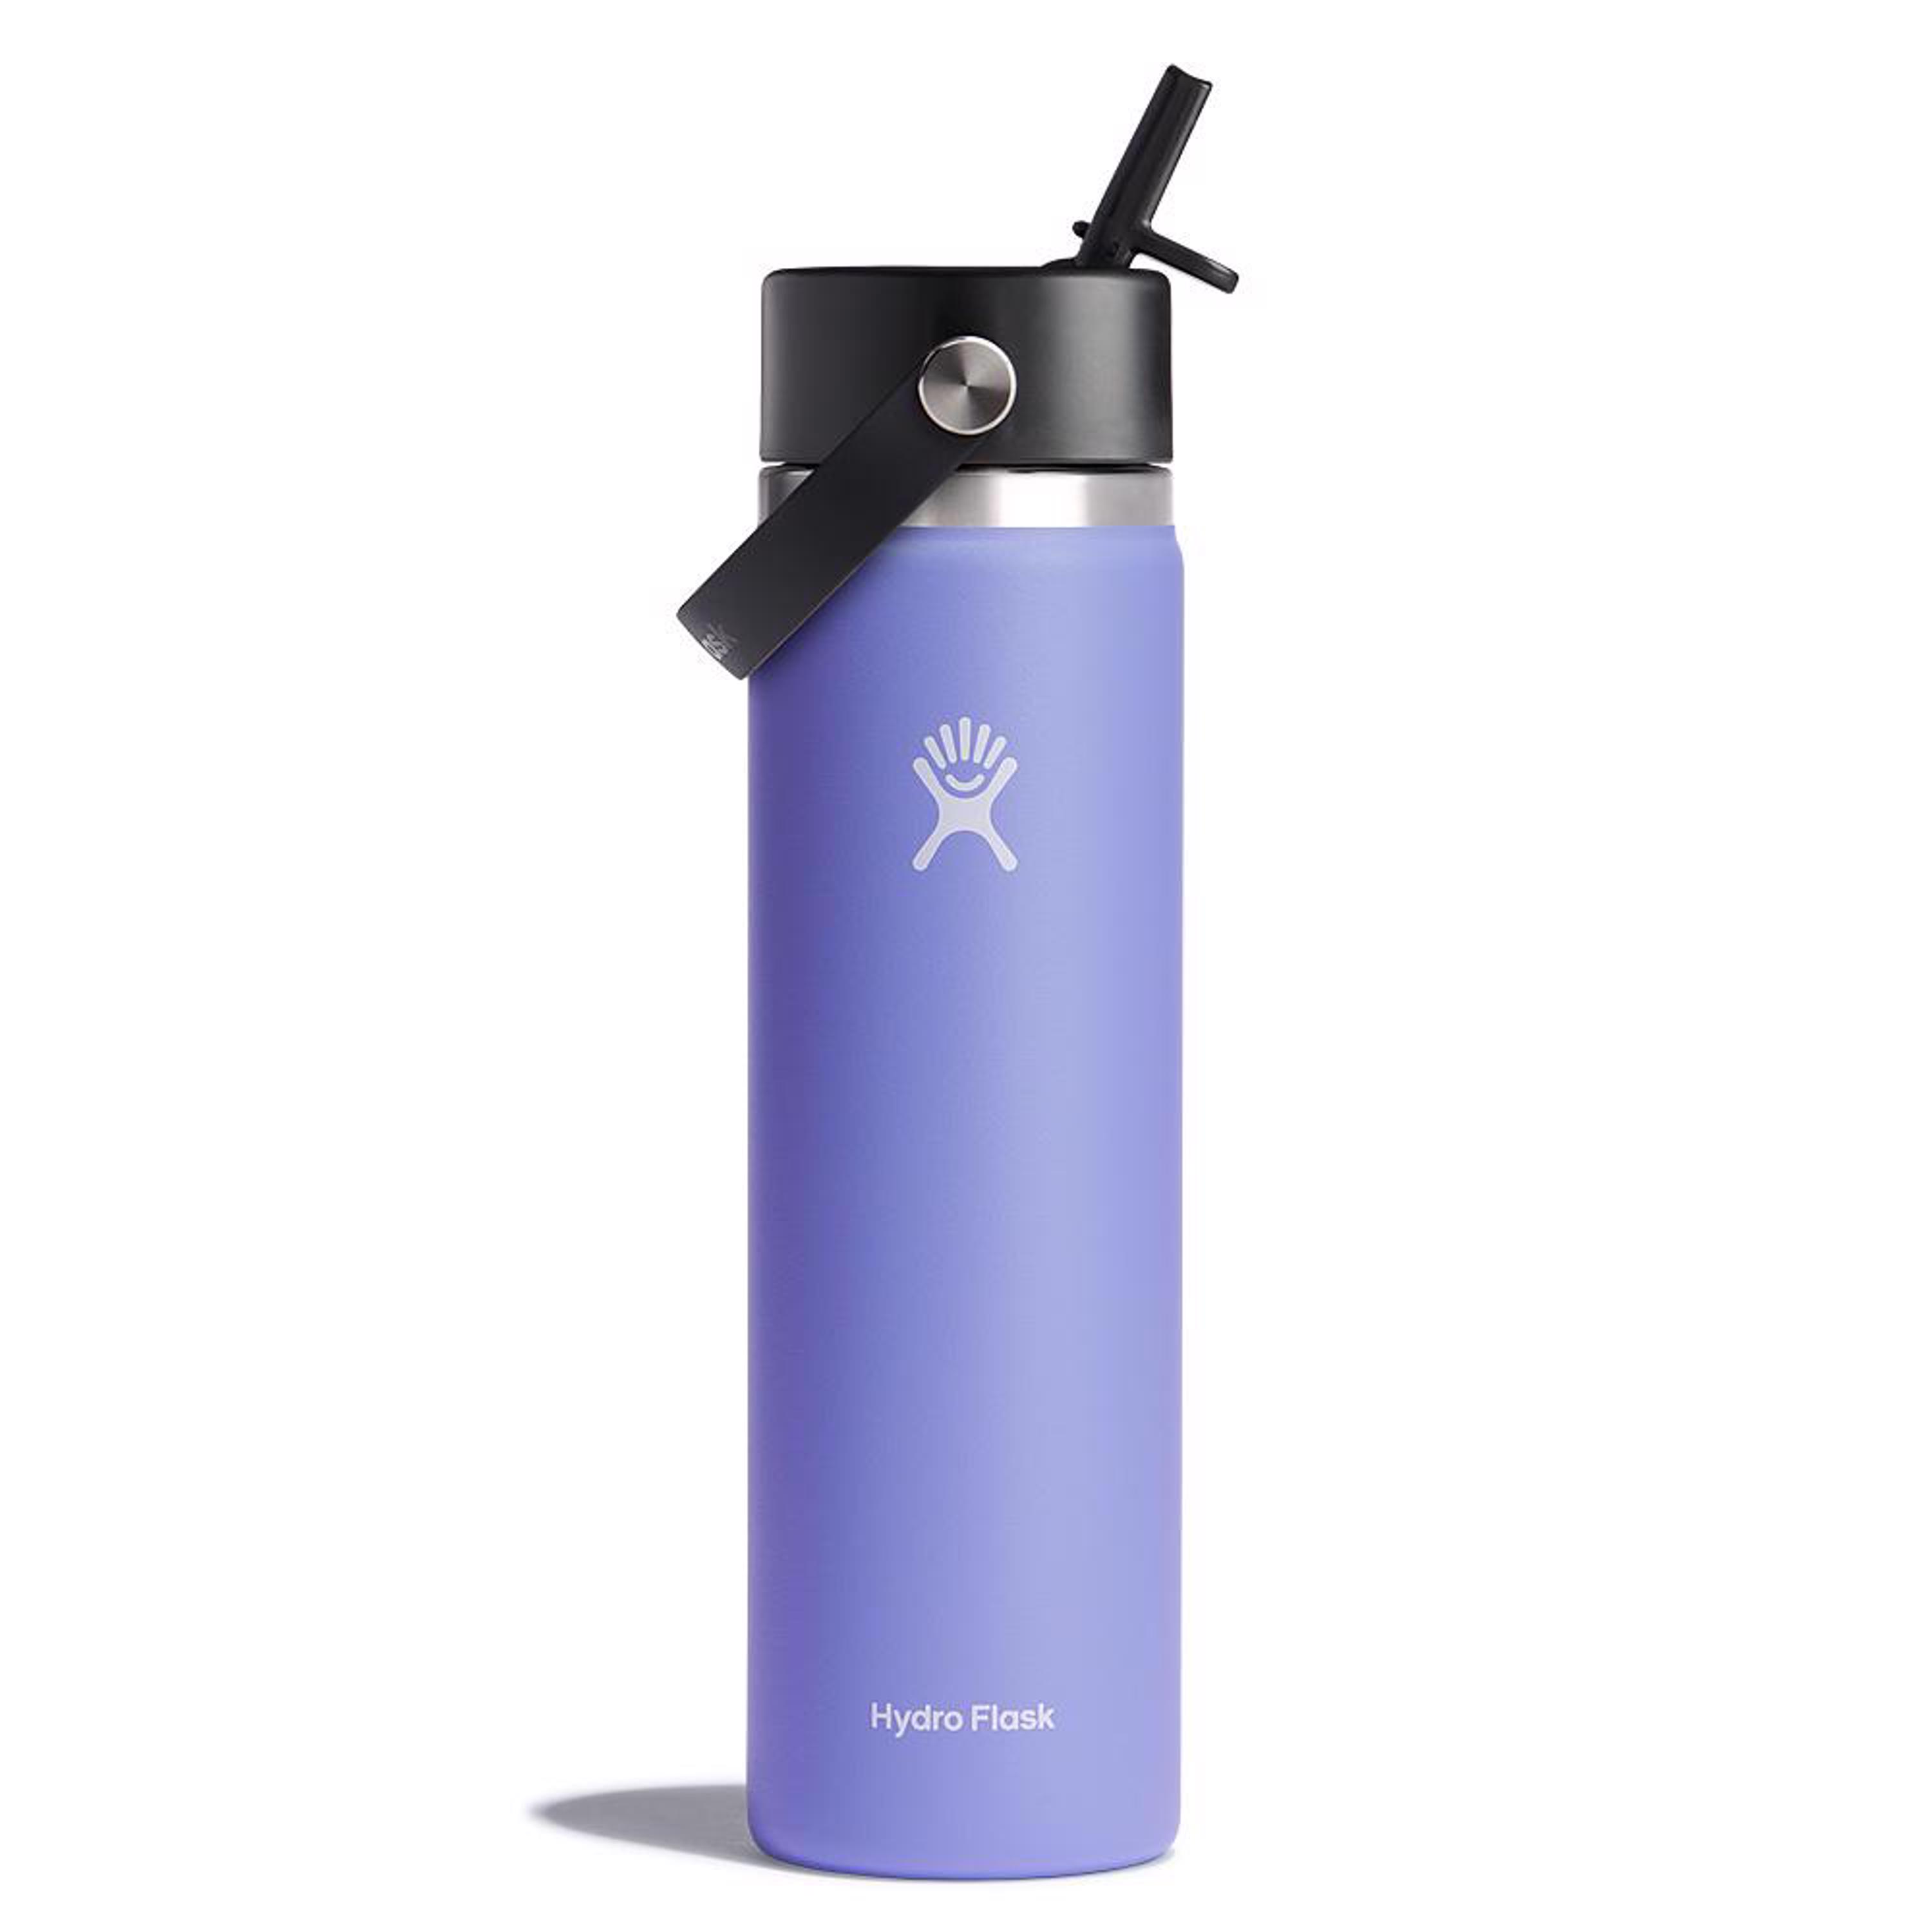 24 oz Poly-Clear Plastic Water Bottle